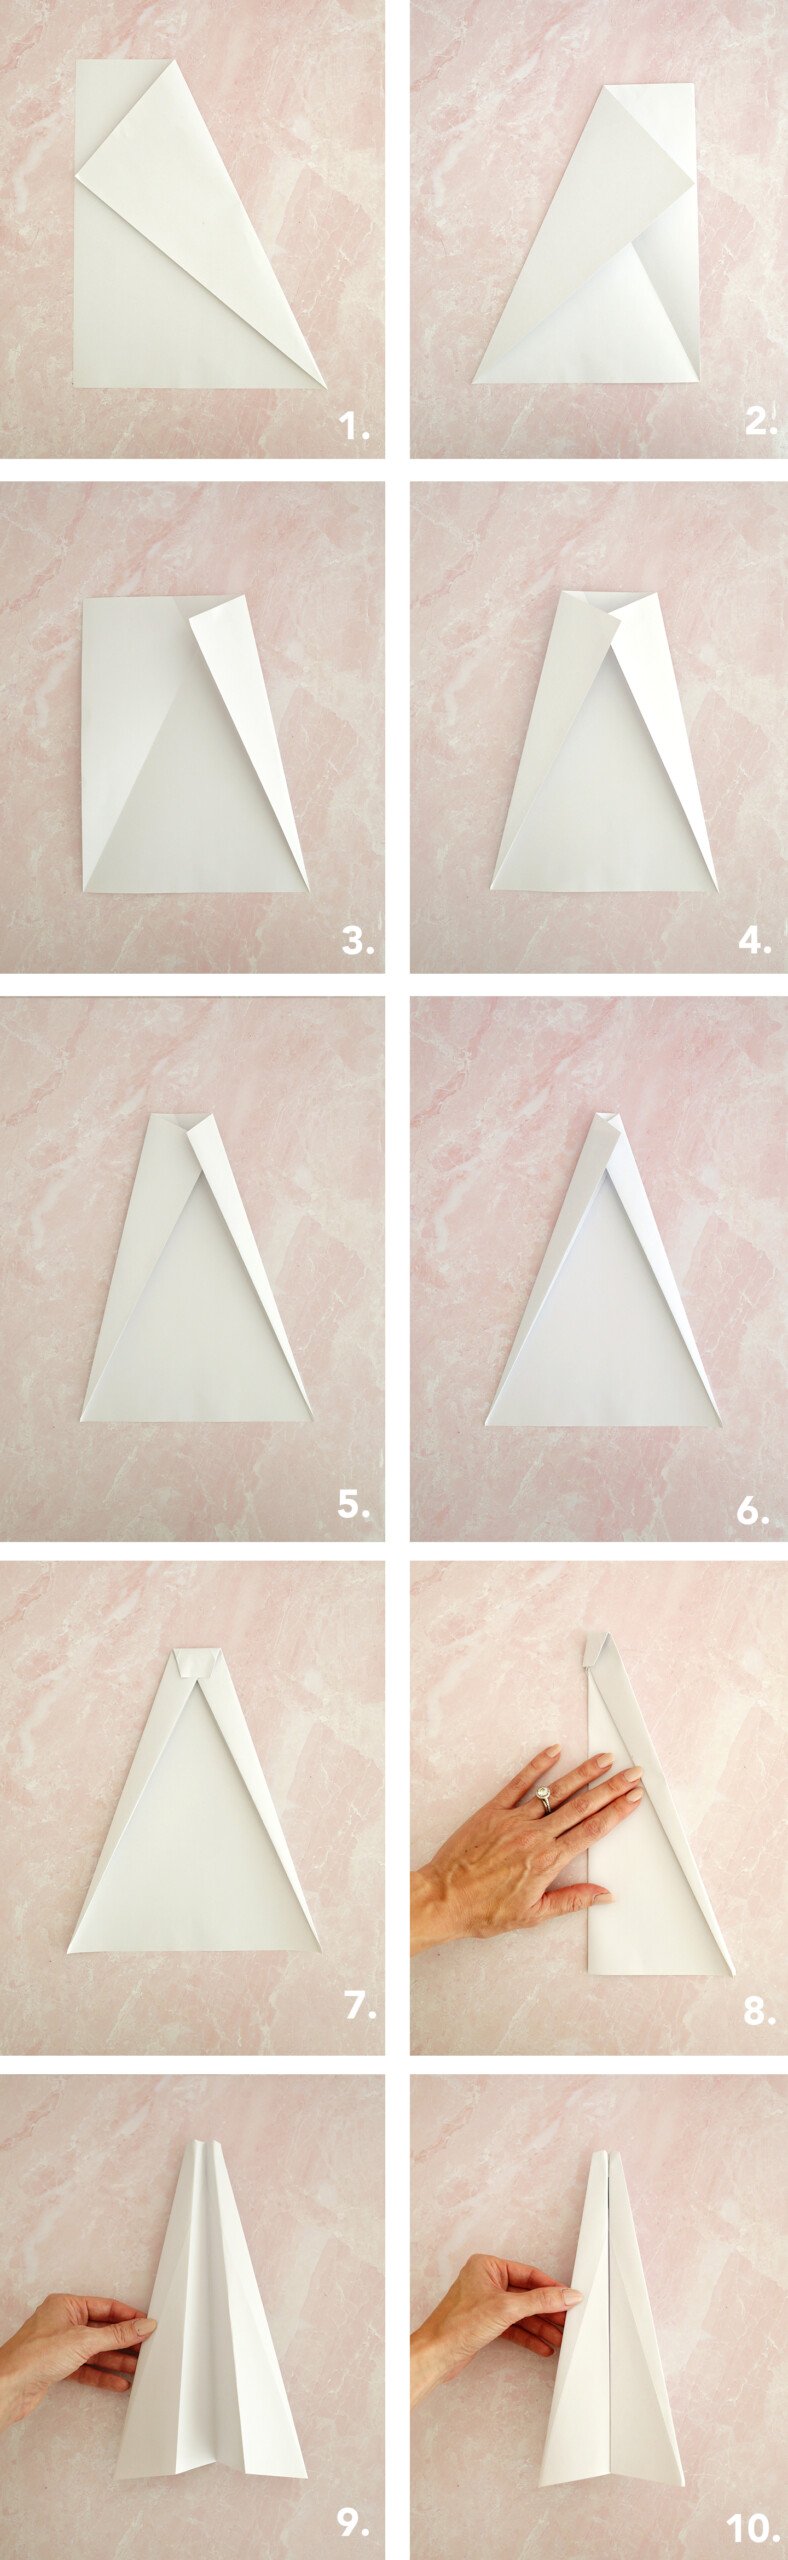 instructions for how to make a bullnose paper airplane